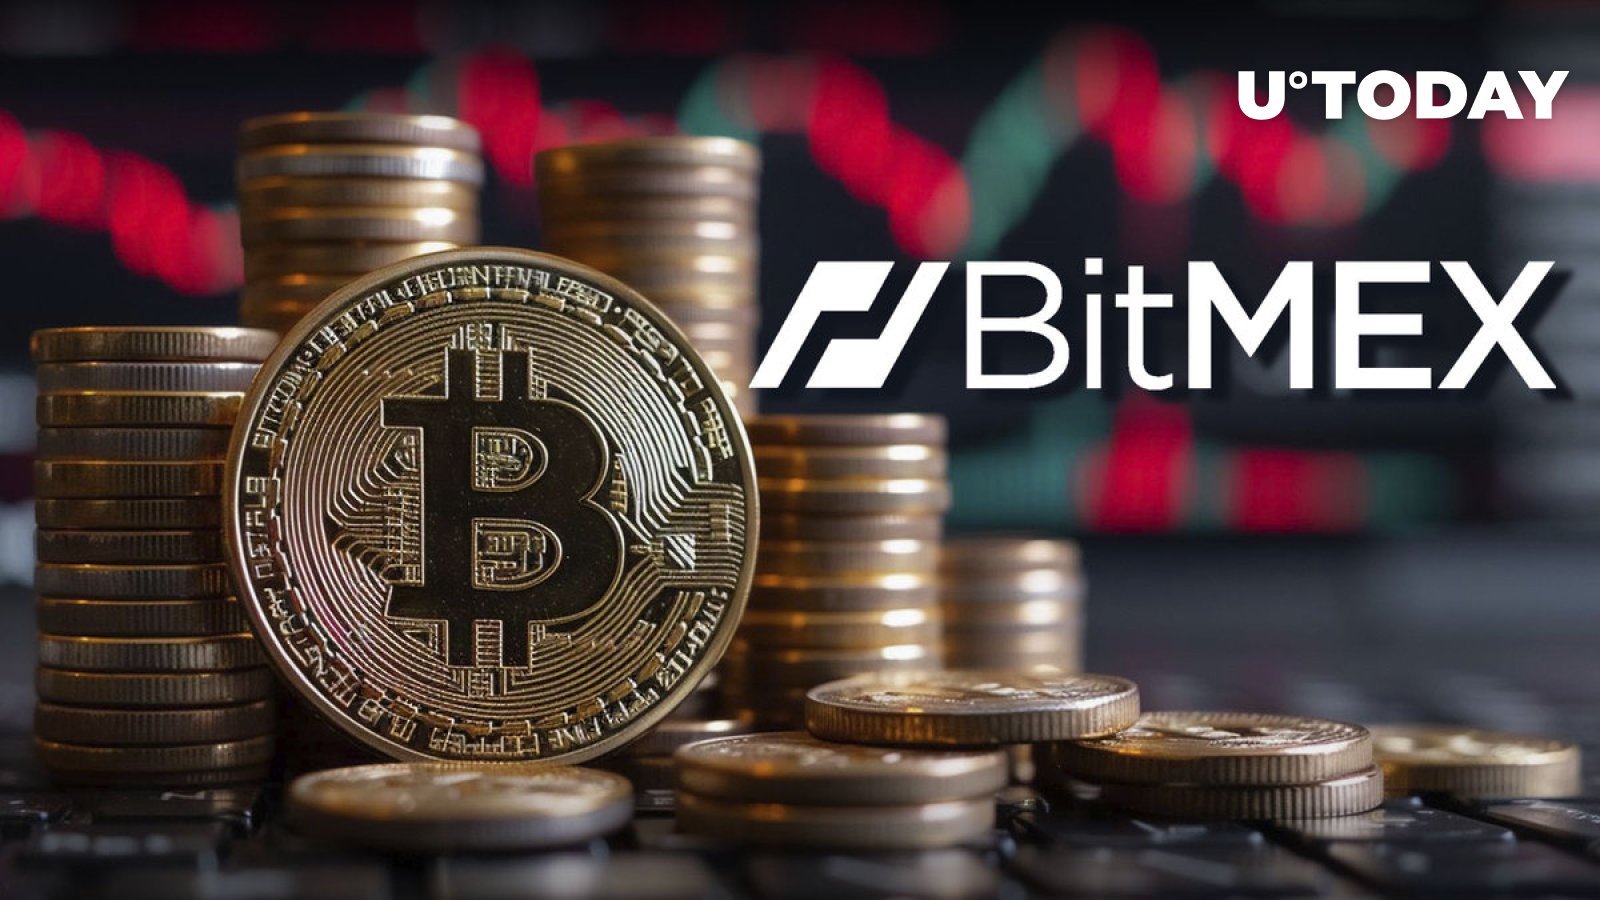 This Bitcoin (BTC) Halving Will Be Special, BitMEX Research Says